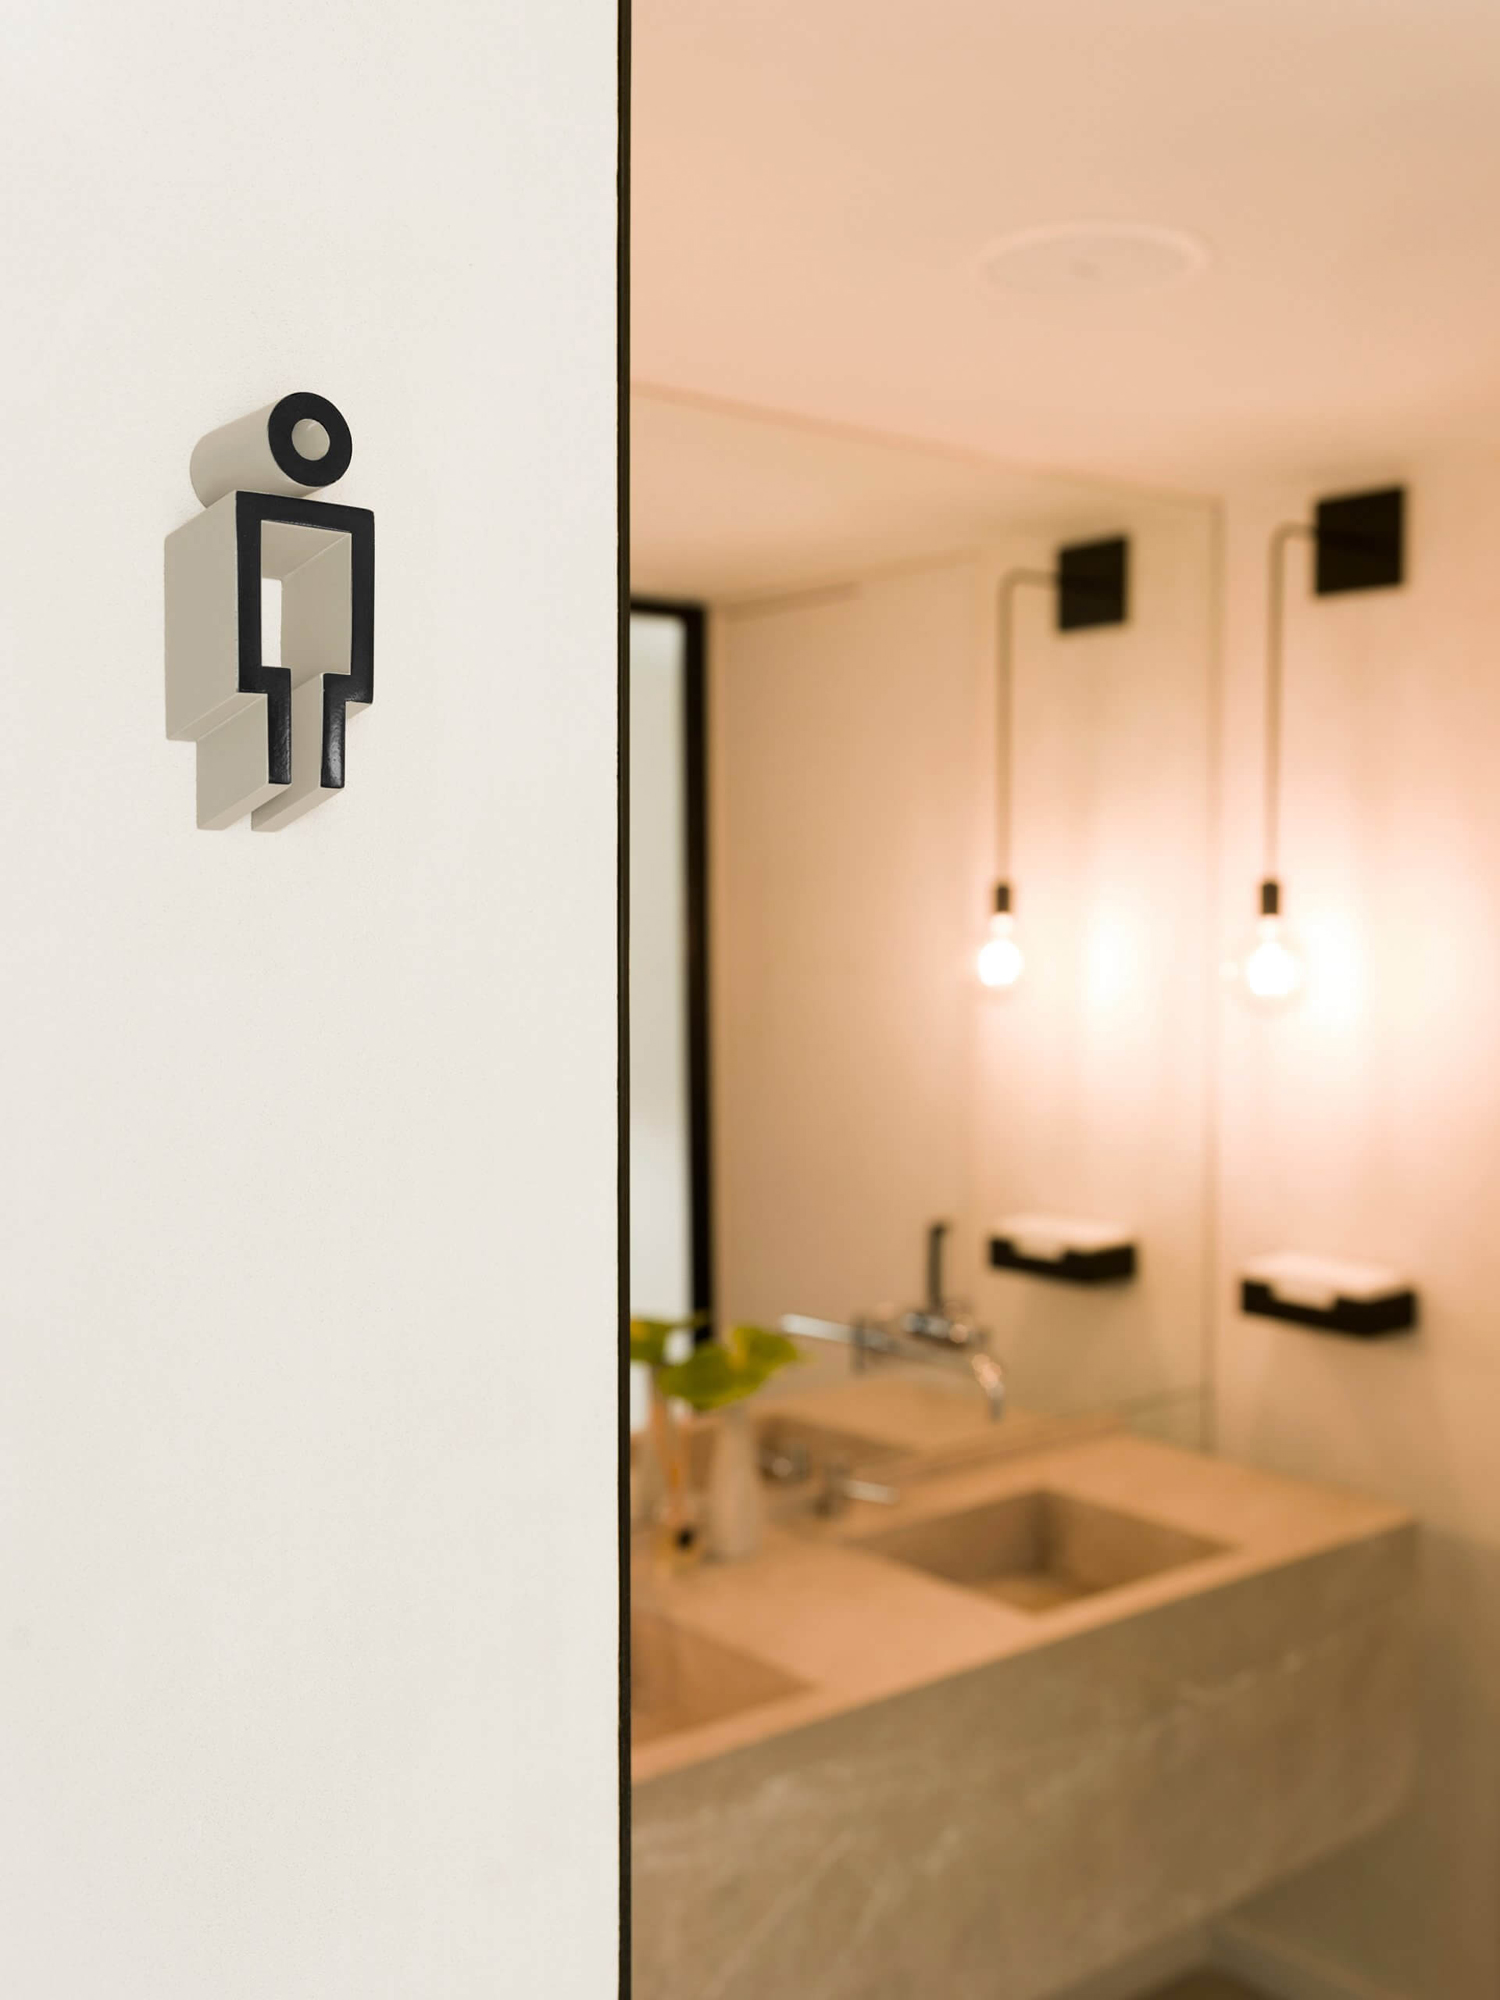 WC signage designed by Mucho for Spanish 5-star hotel Sant Francesc.